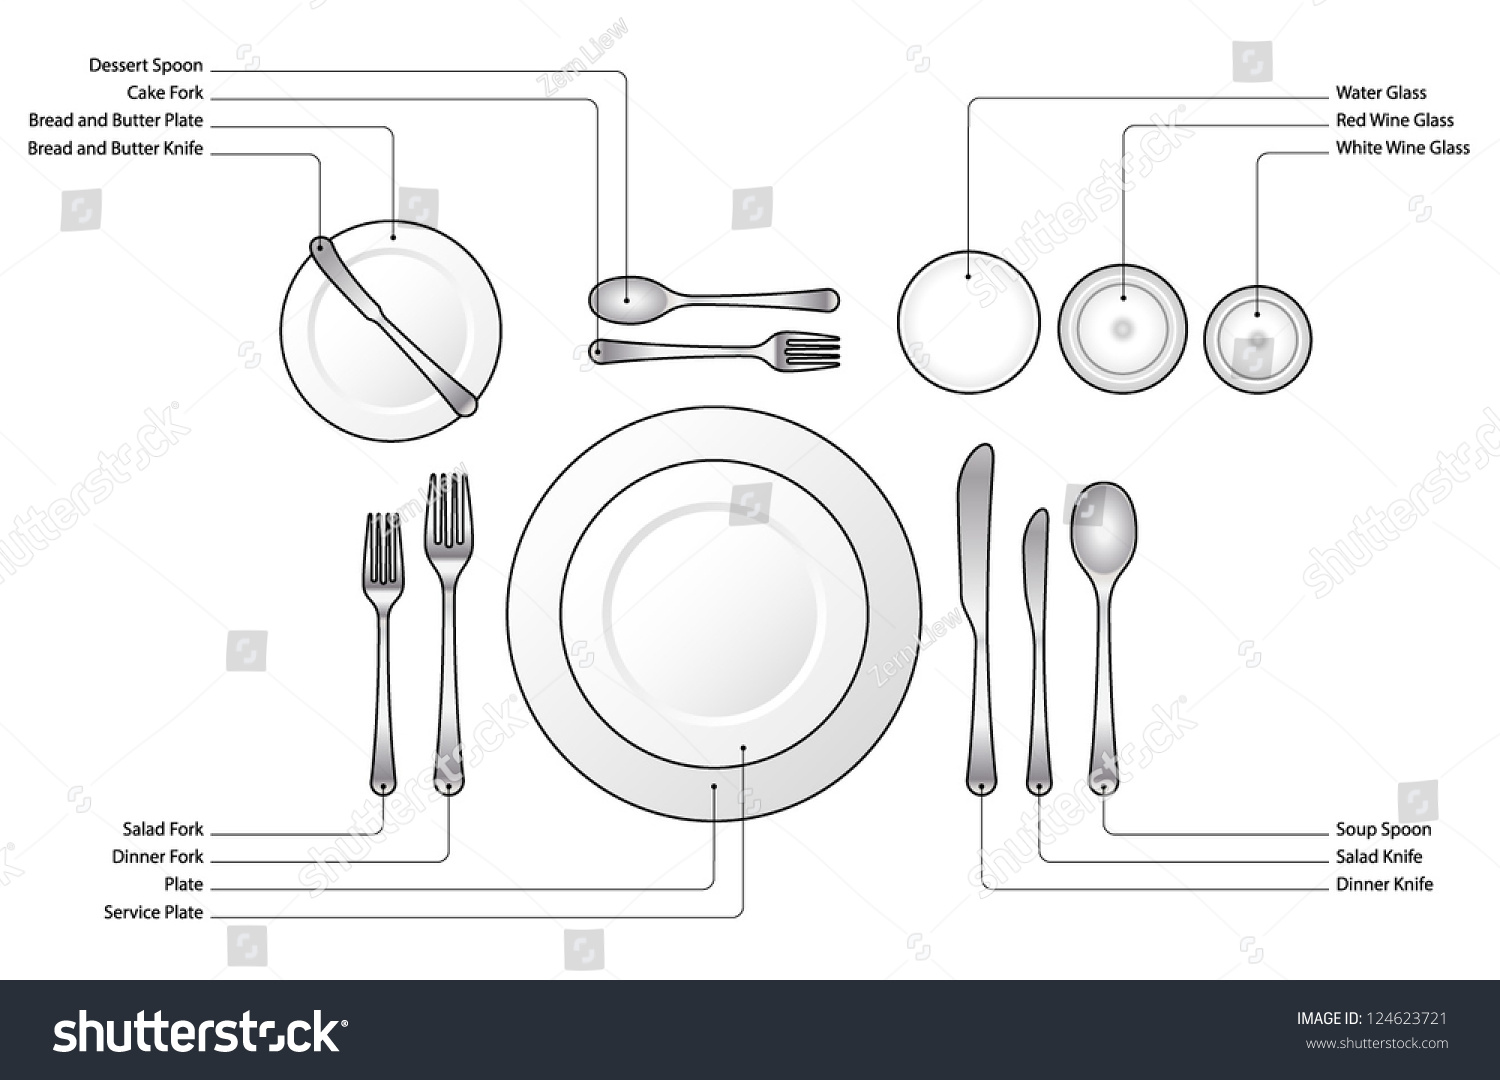 Diagram: Place Setting For A Formal Dinner With Soup And Salad Courses